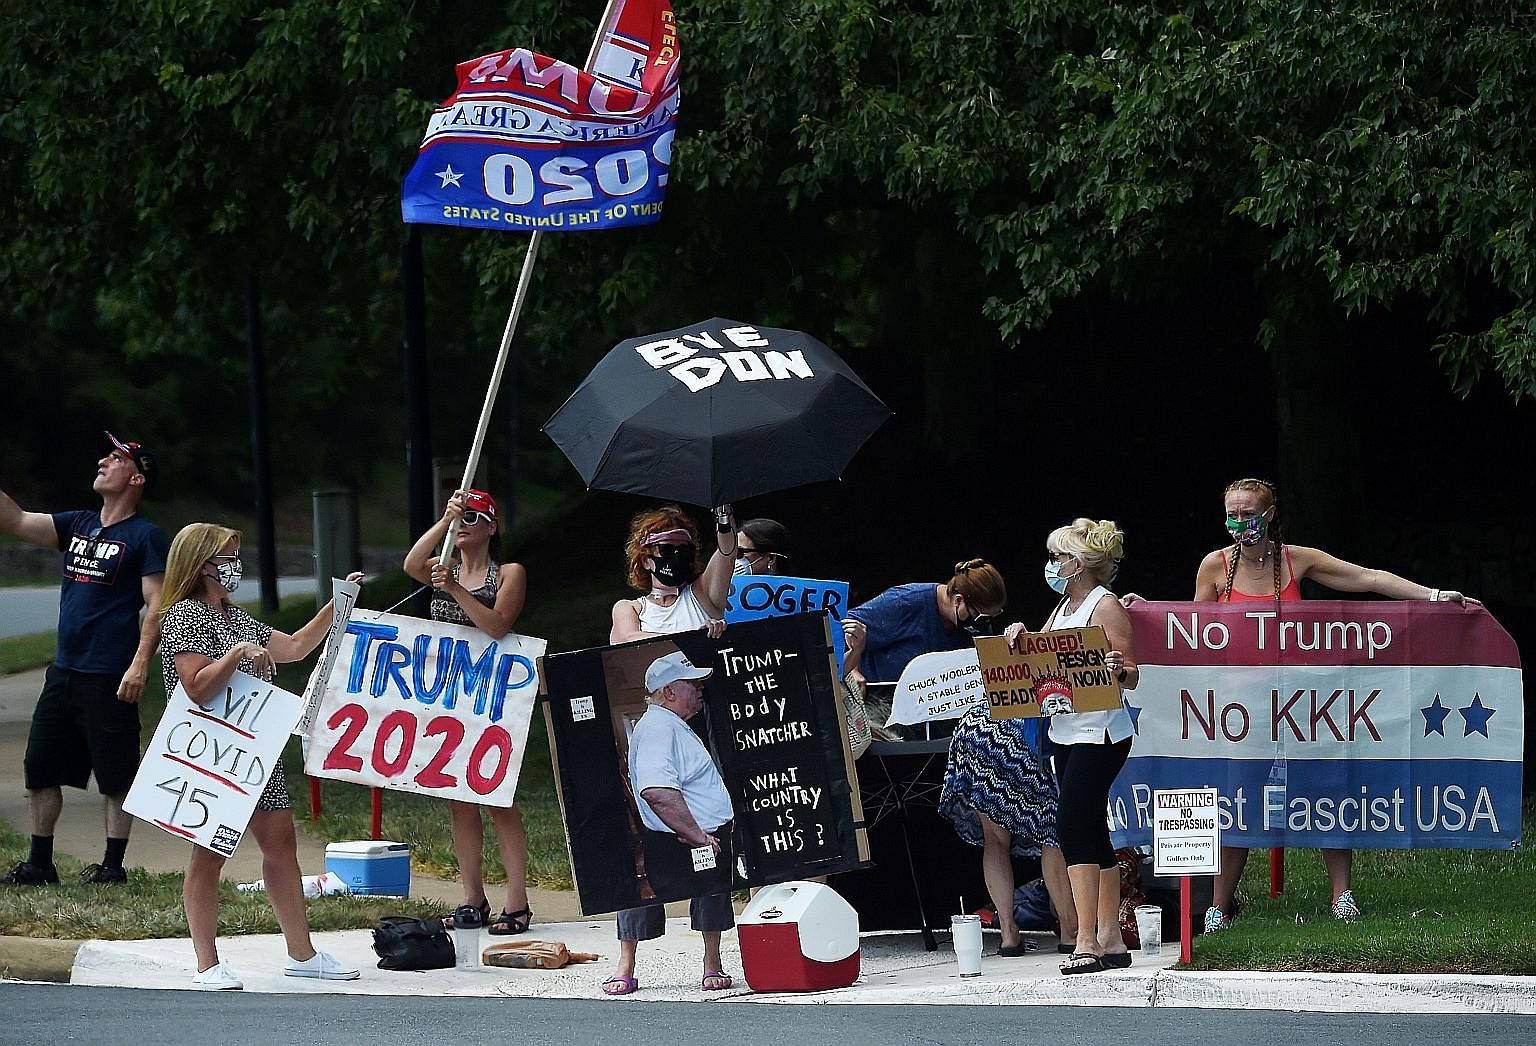 Protesters and supporters of US President Donald Trump sending their respective messages outside the Trump National Golf Club in Sterling, Virginia, on Sunday.